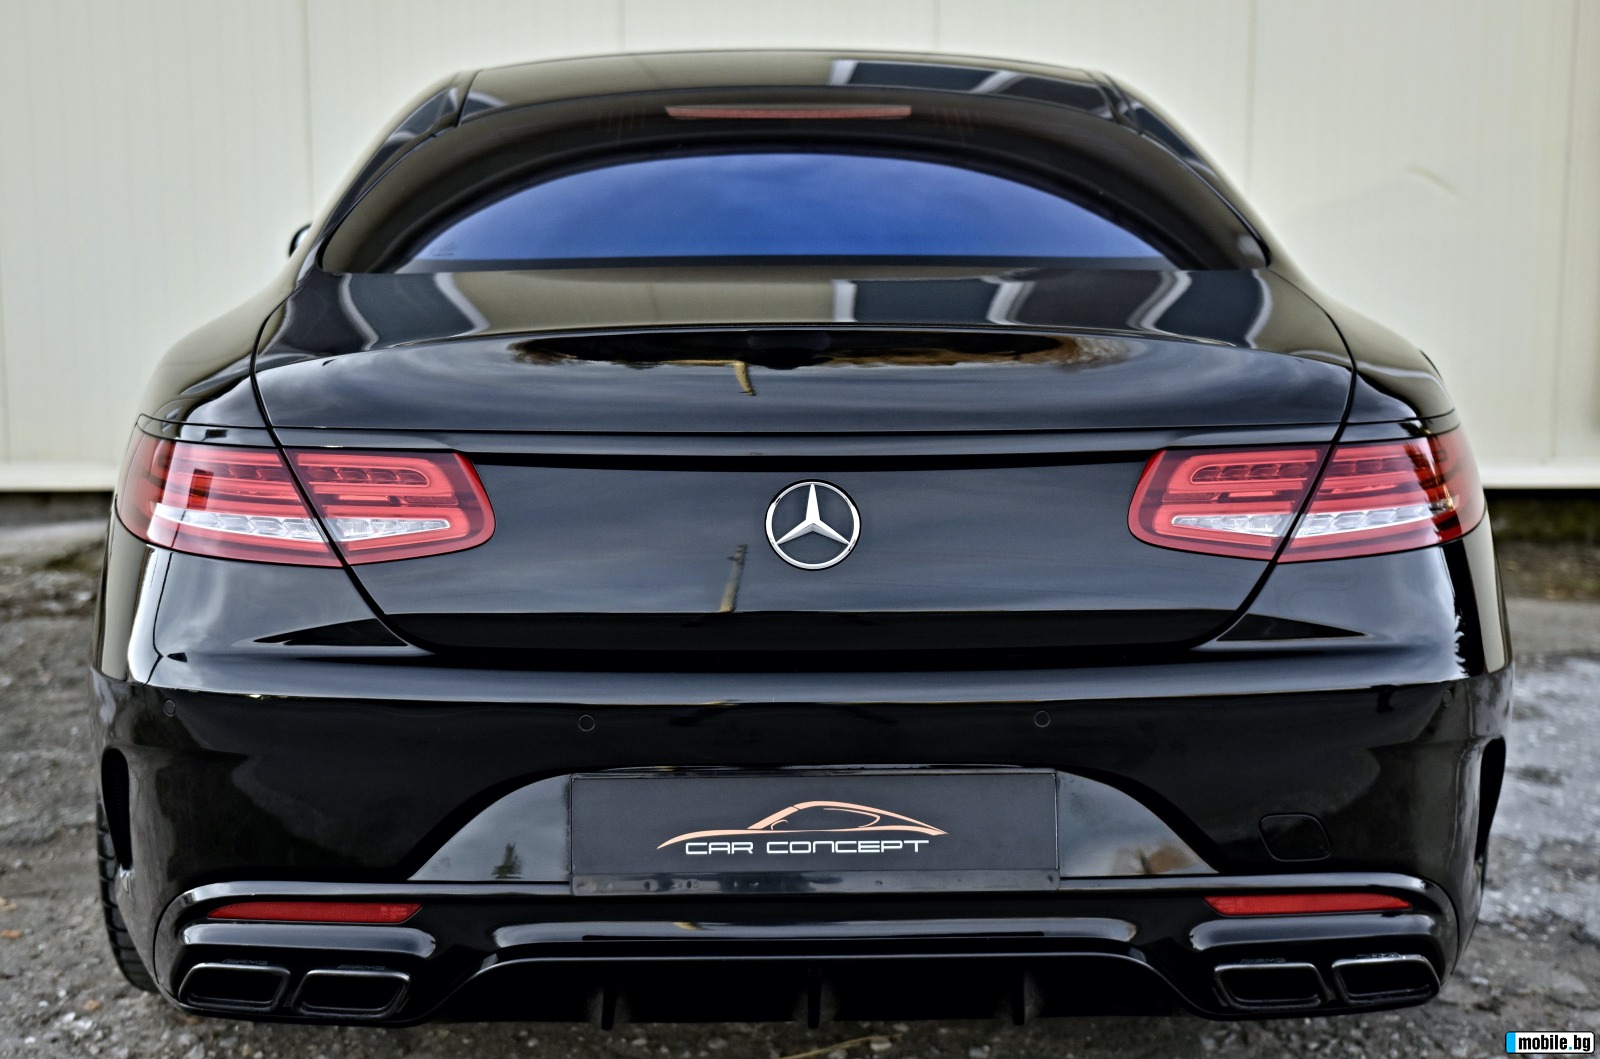 Mercedes-Benz S 500 COUPE 9G 4Matic 63AMG Styling DESIGNO 360 BURMES   | Mobile.bg   5